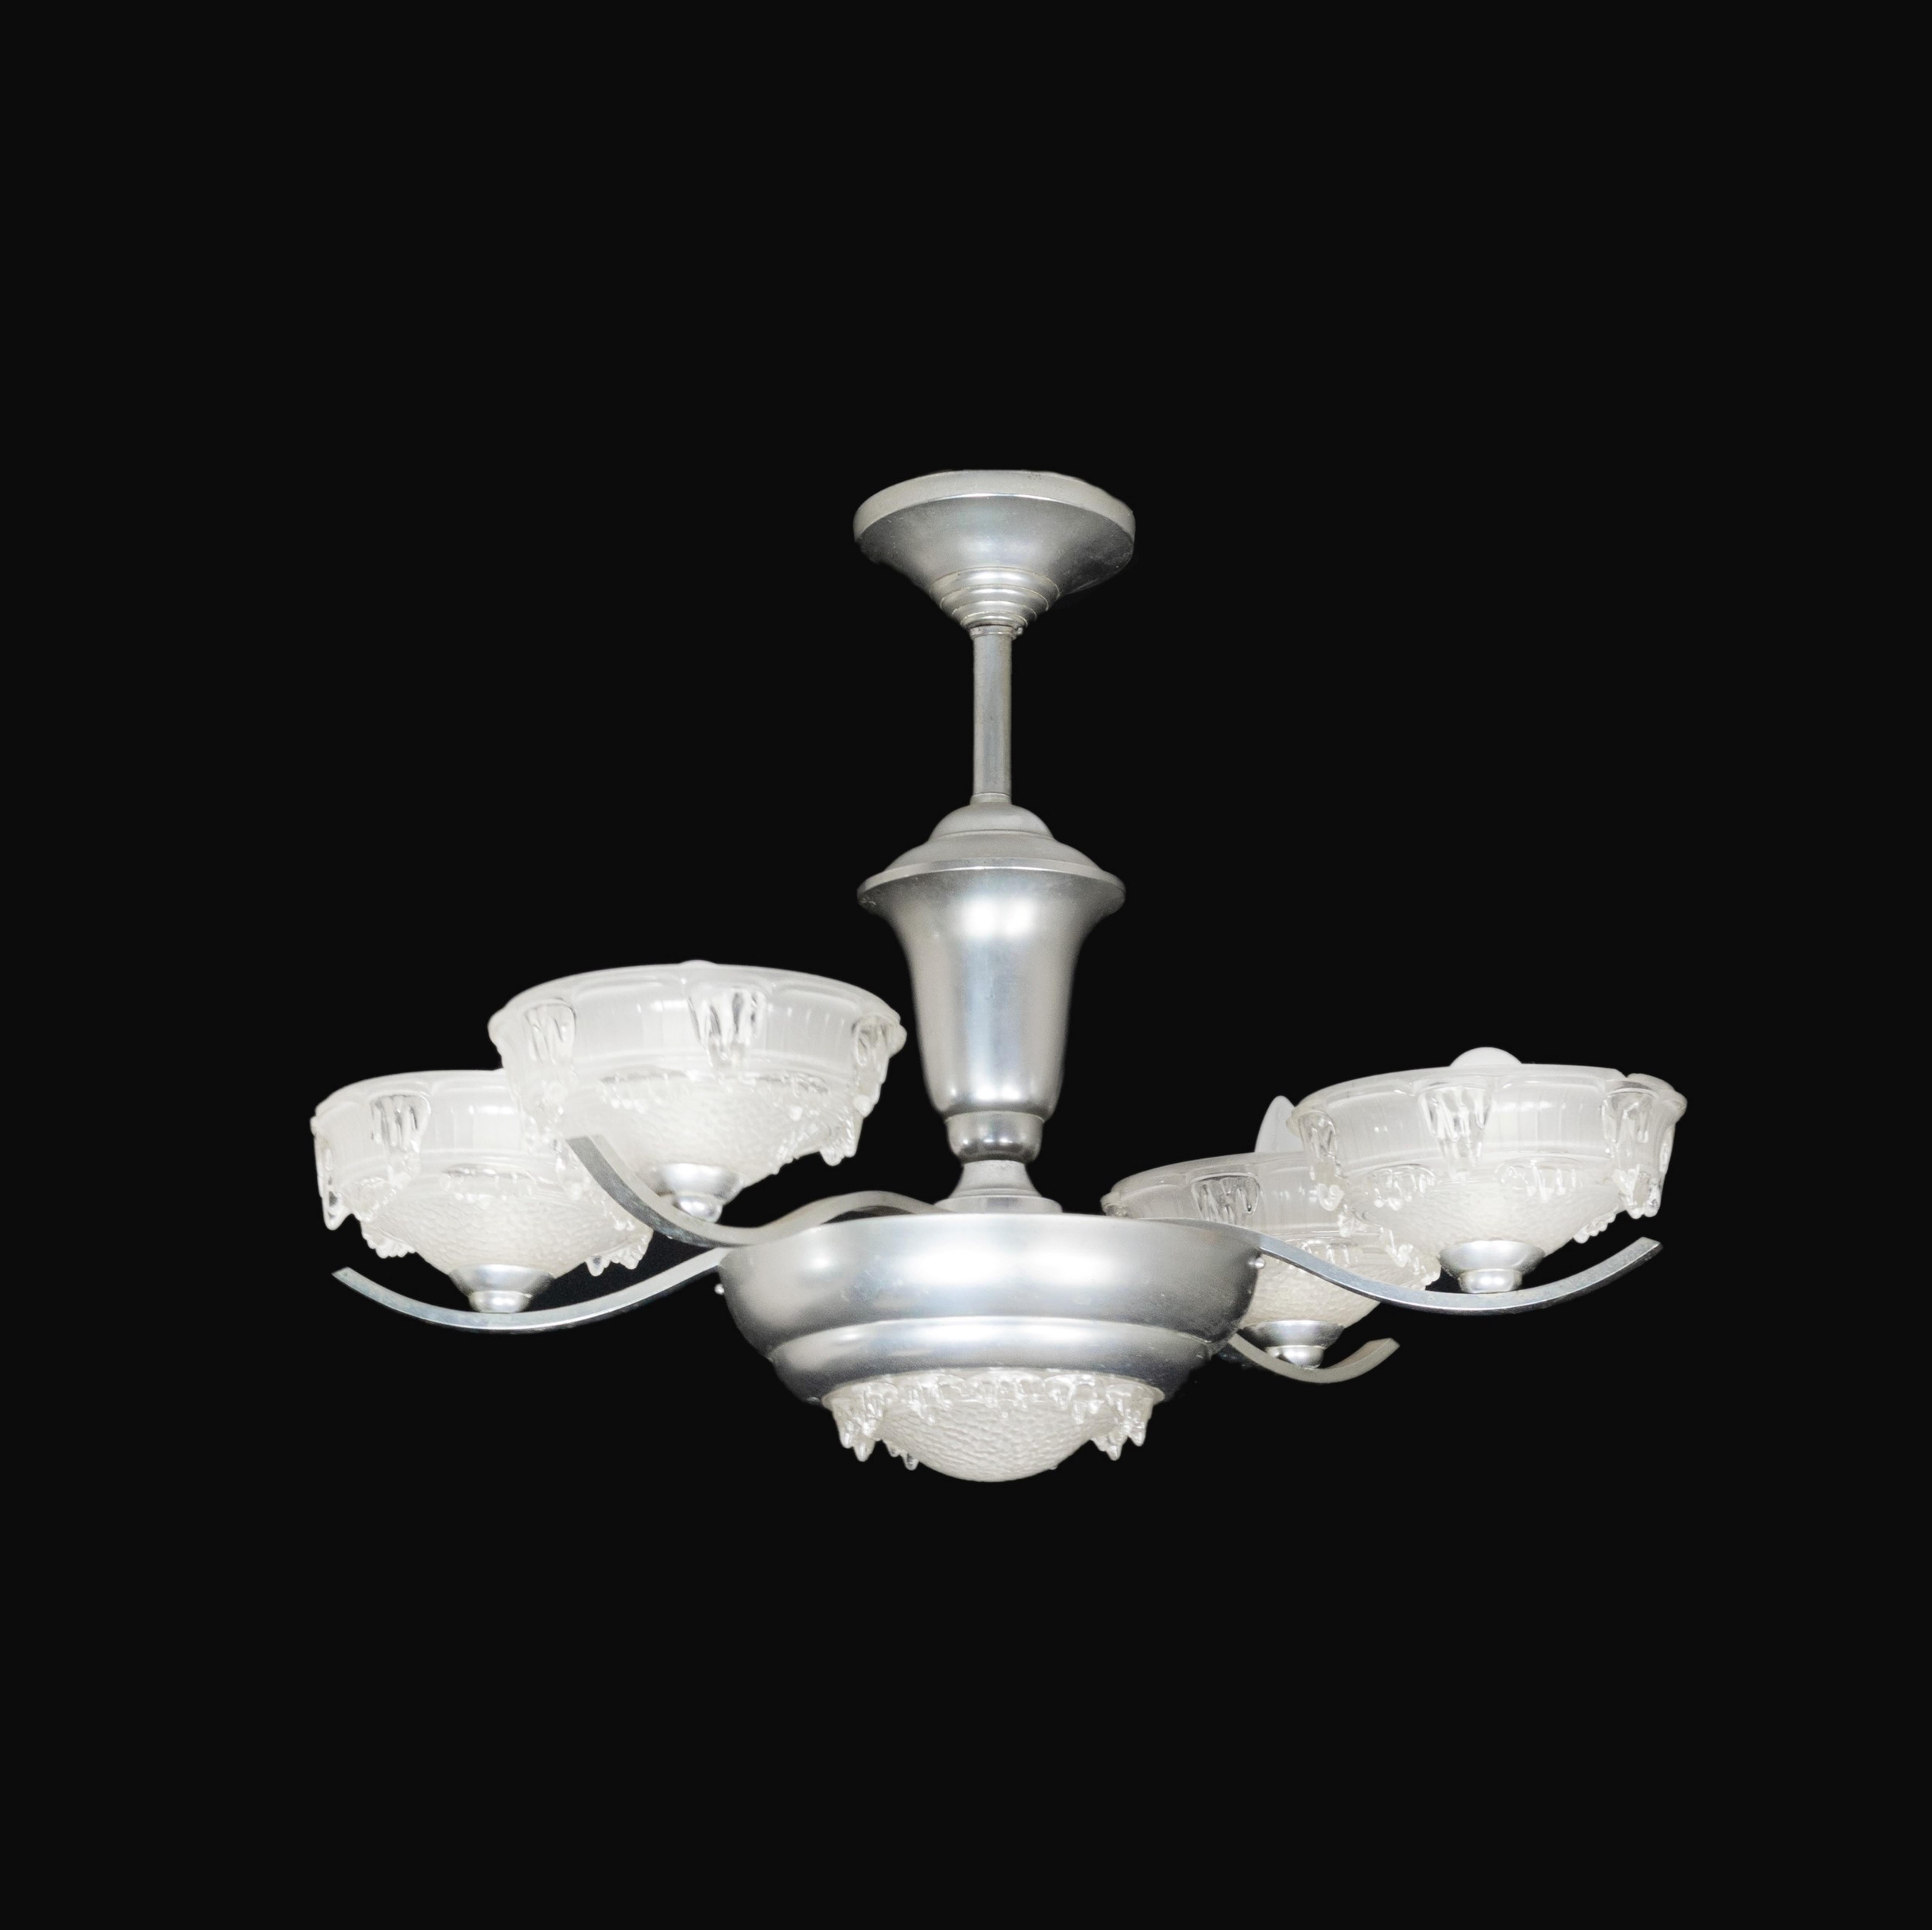 An Art Deco bistro chromed color four arms chandelier with frosted glass.  
Good. Reviewed recently and in working conditions.  

The chandelier is currently wired for both European Union and US standards LED lights. The LED lamp bulbs you see in